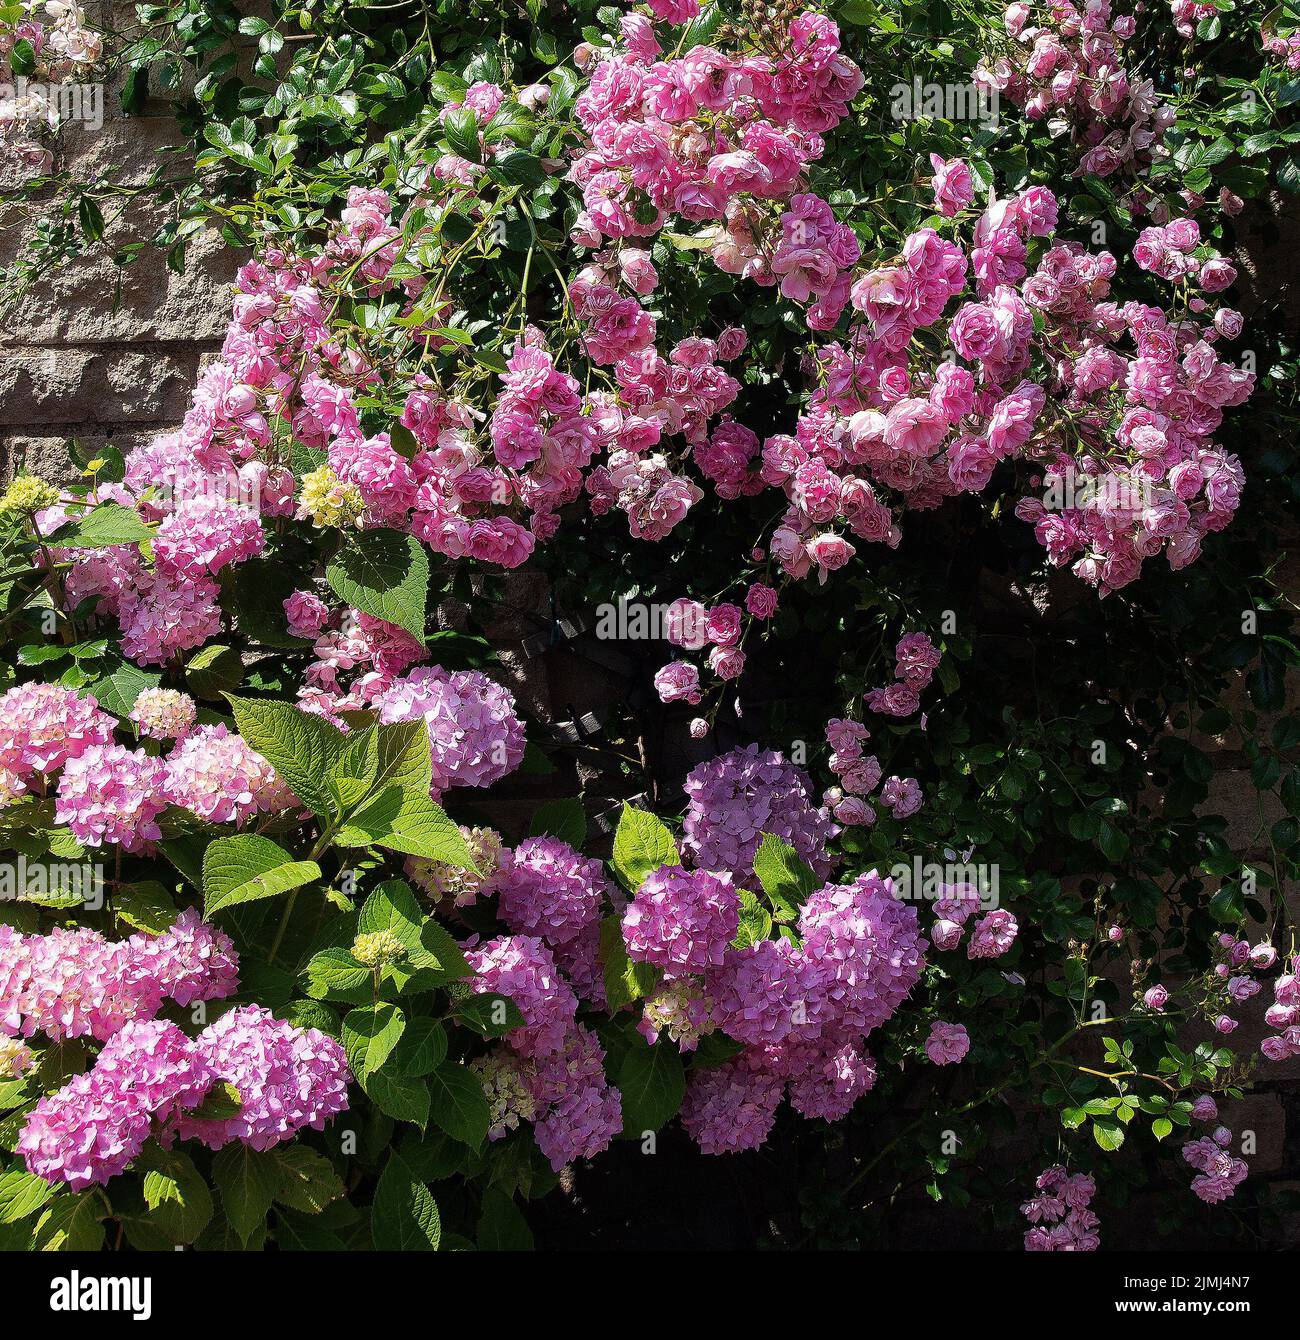 Rambling rose 'Super Fairy' here partnered with pink hydrangea bears small, fully double, mid pink flowers in great abundance throughout the summer. T Stock Photo